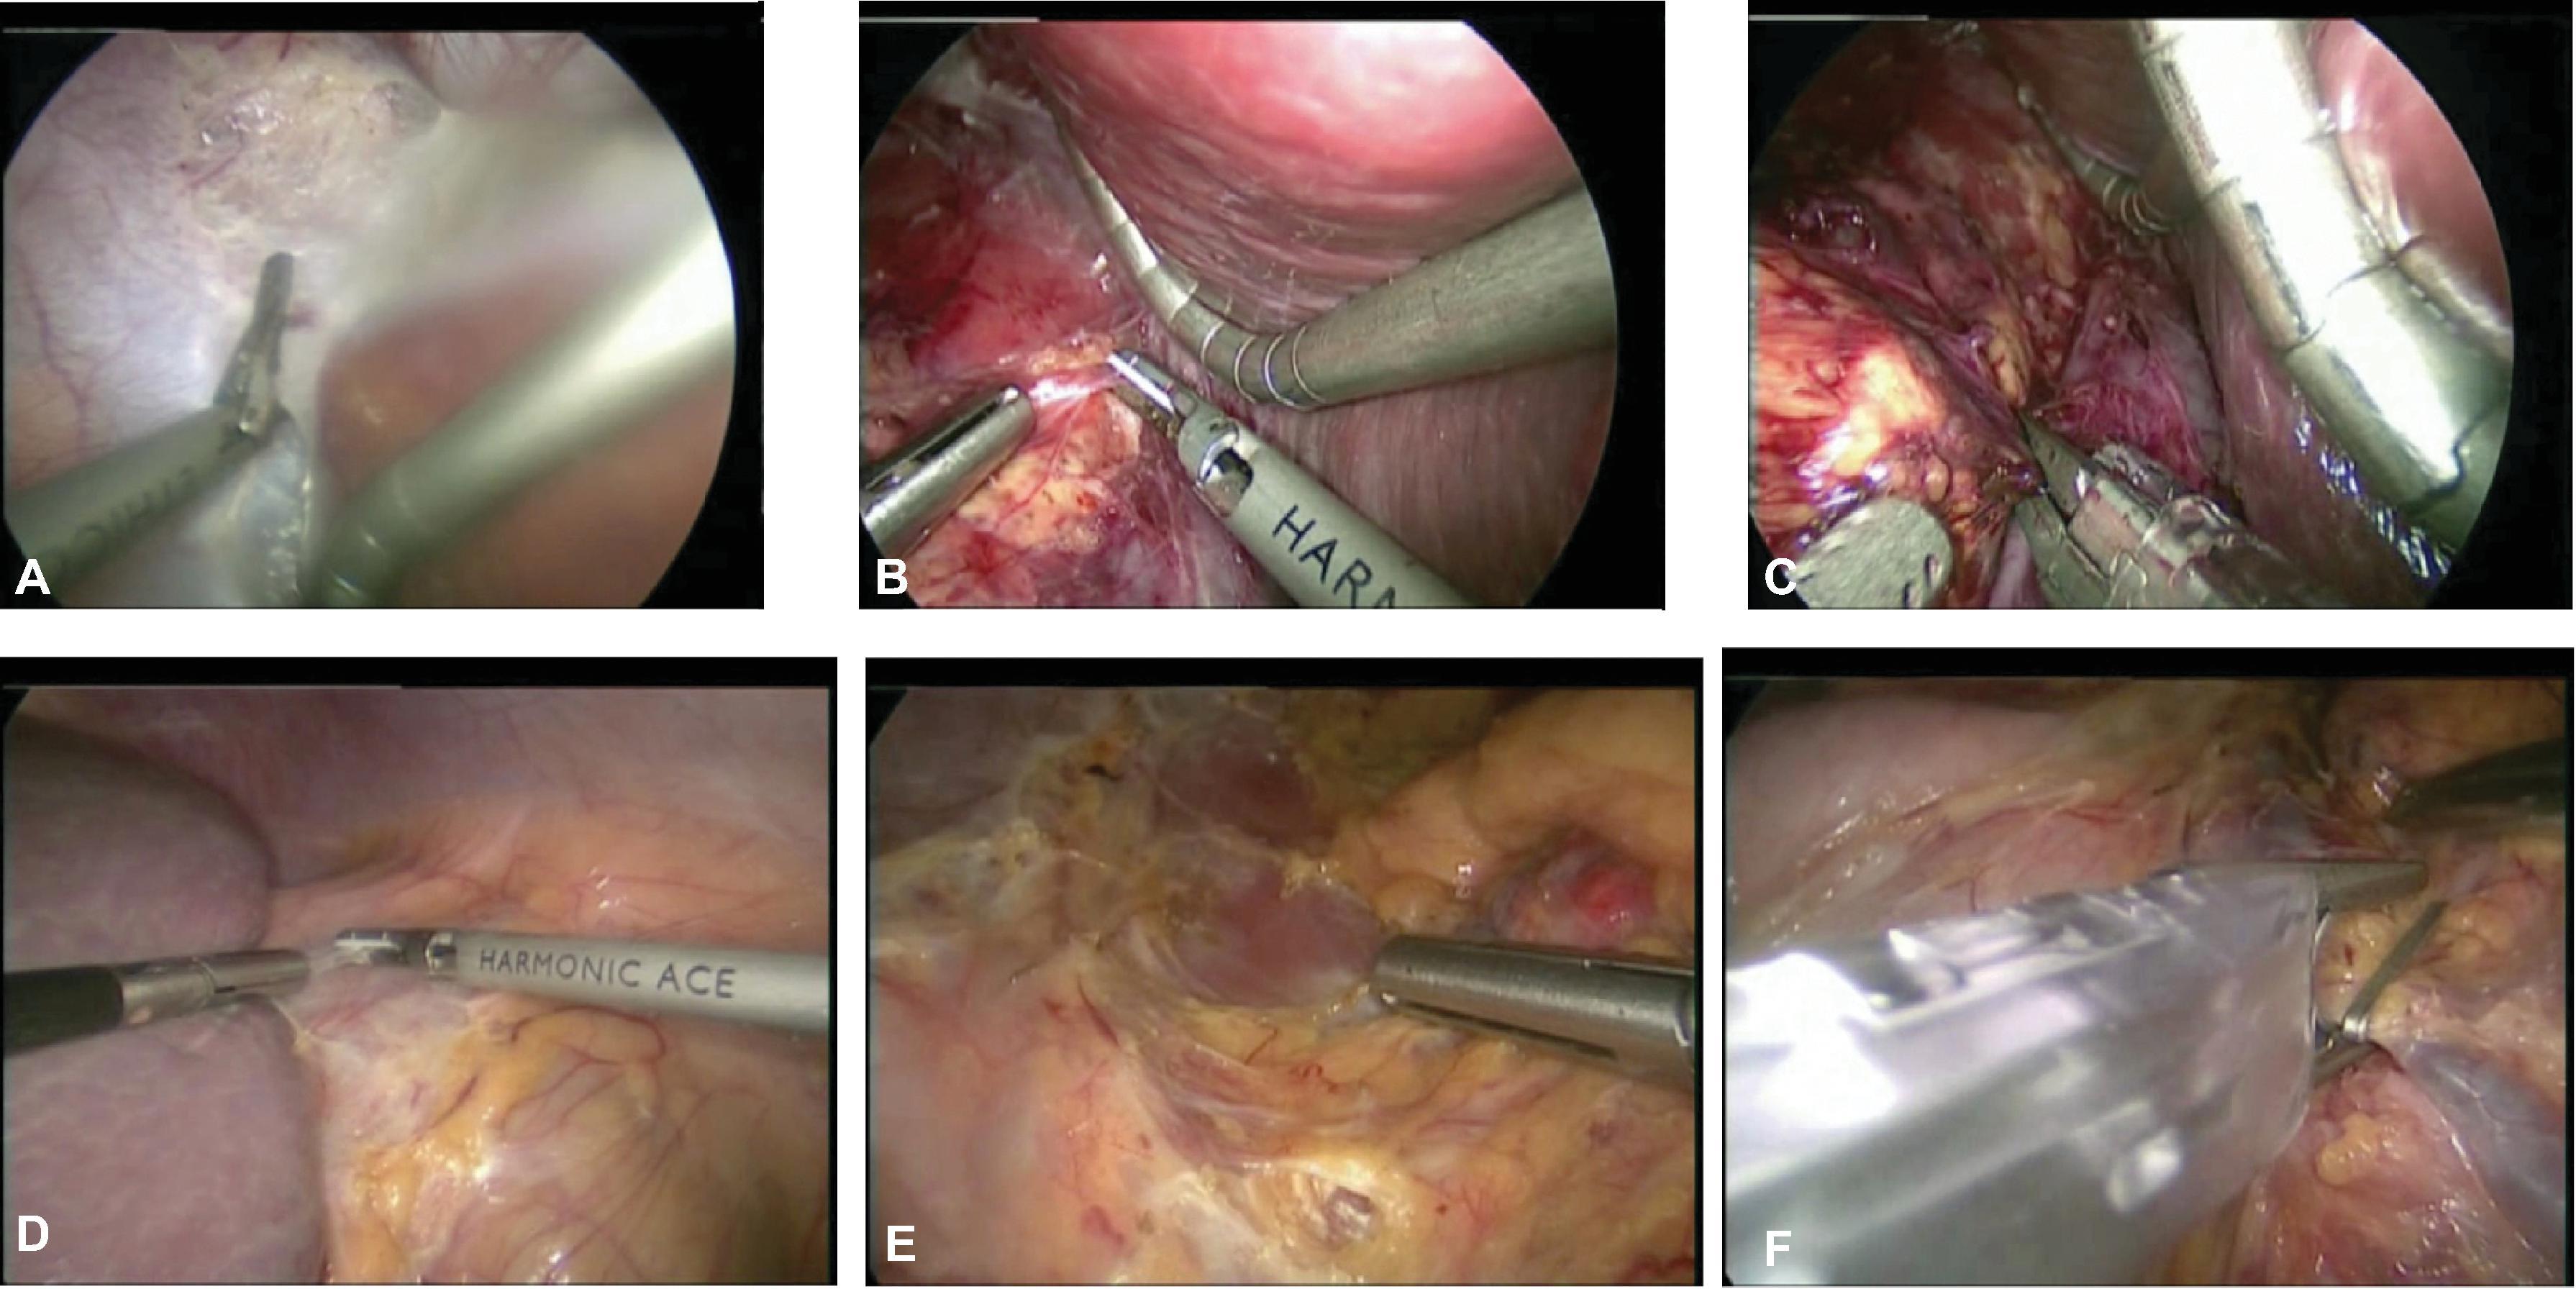 FIG. 4, Key steps in right lateral laparoscopic adrenalectomy. On the right side, (A) the triangular ligament is divided to mobilize the right lobe of the liver medially; (B) the adrenal gland and tumor are dissected from the top down along the medial edge after opening Gerota’s fascia; (C) the adrenal arteries (usually small) and the adrenal vein are encountered and the vein is clipped and divided. Adrenal pheochromocytoma may have multiple parasitic vessels. The inferior limb of the gland is carefully dissected free from the renal hilum and the renal vessels. The gland is then mobilized free from the kidney and retroperitoneal fat. The adrenal gland is placed in a bag and removed without morselization. On the left side, (D) the splenic flexure of the colon is mobilized free, as well as the lateral attachments of the spleen along the avascular space; (E) Gerota’s fascia is divided superior and medial to the adrenal gland and the dissection continued inferior; (F) often the inferior phrenic vein is identified along the medial aspect of the adrenal gland and can be traced down to the adrenal vein. The vein is clipped and divided. The inferior limb of the gland is carefully dissected free from the renal hilum and the renal vessels. The gland is then mobilized free from the kidney and retroperitoneal fat. The adrenal gland is removed in a bag.